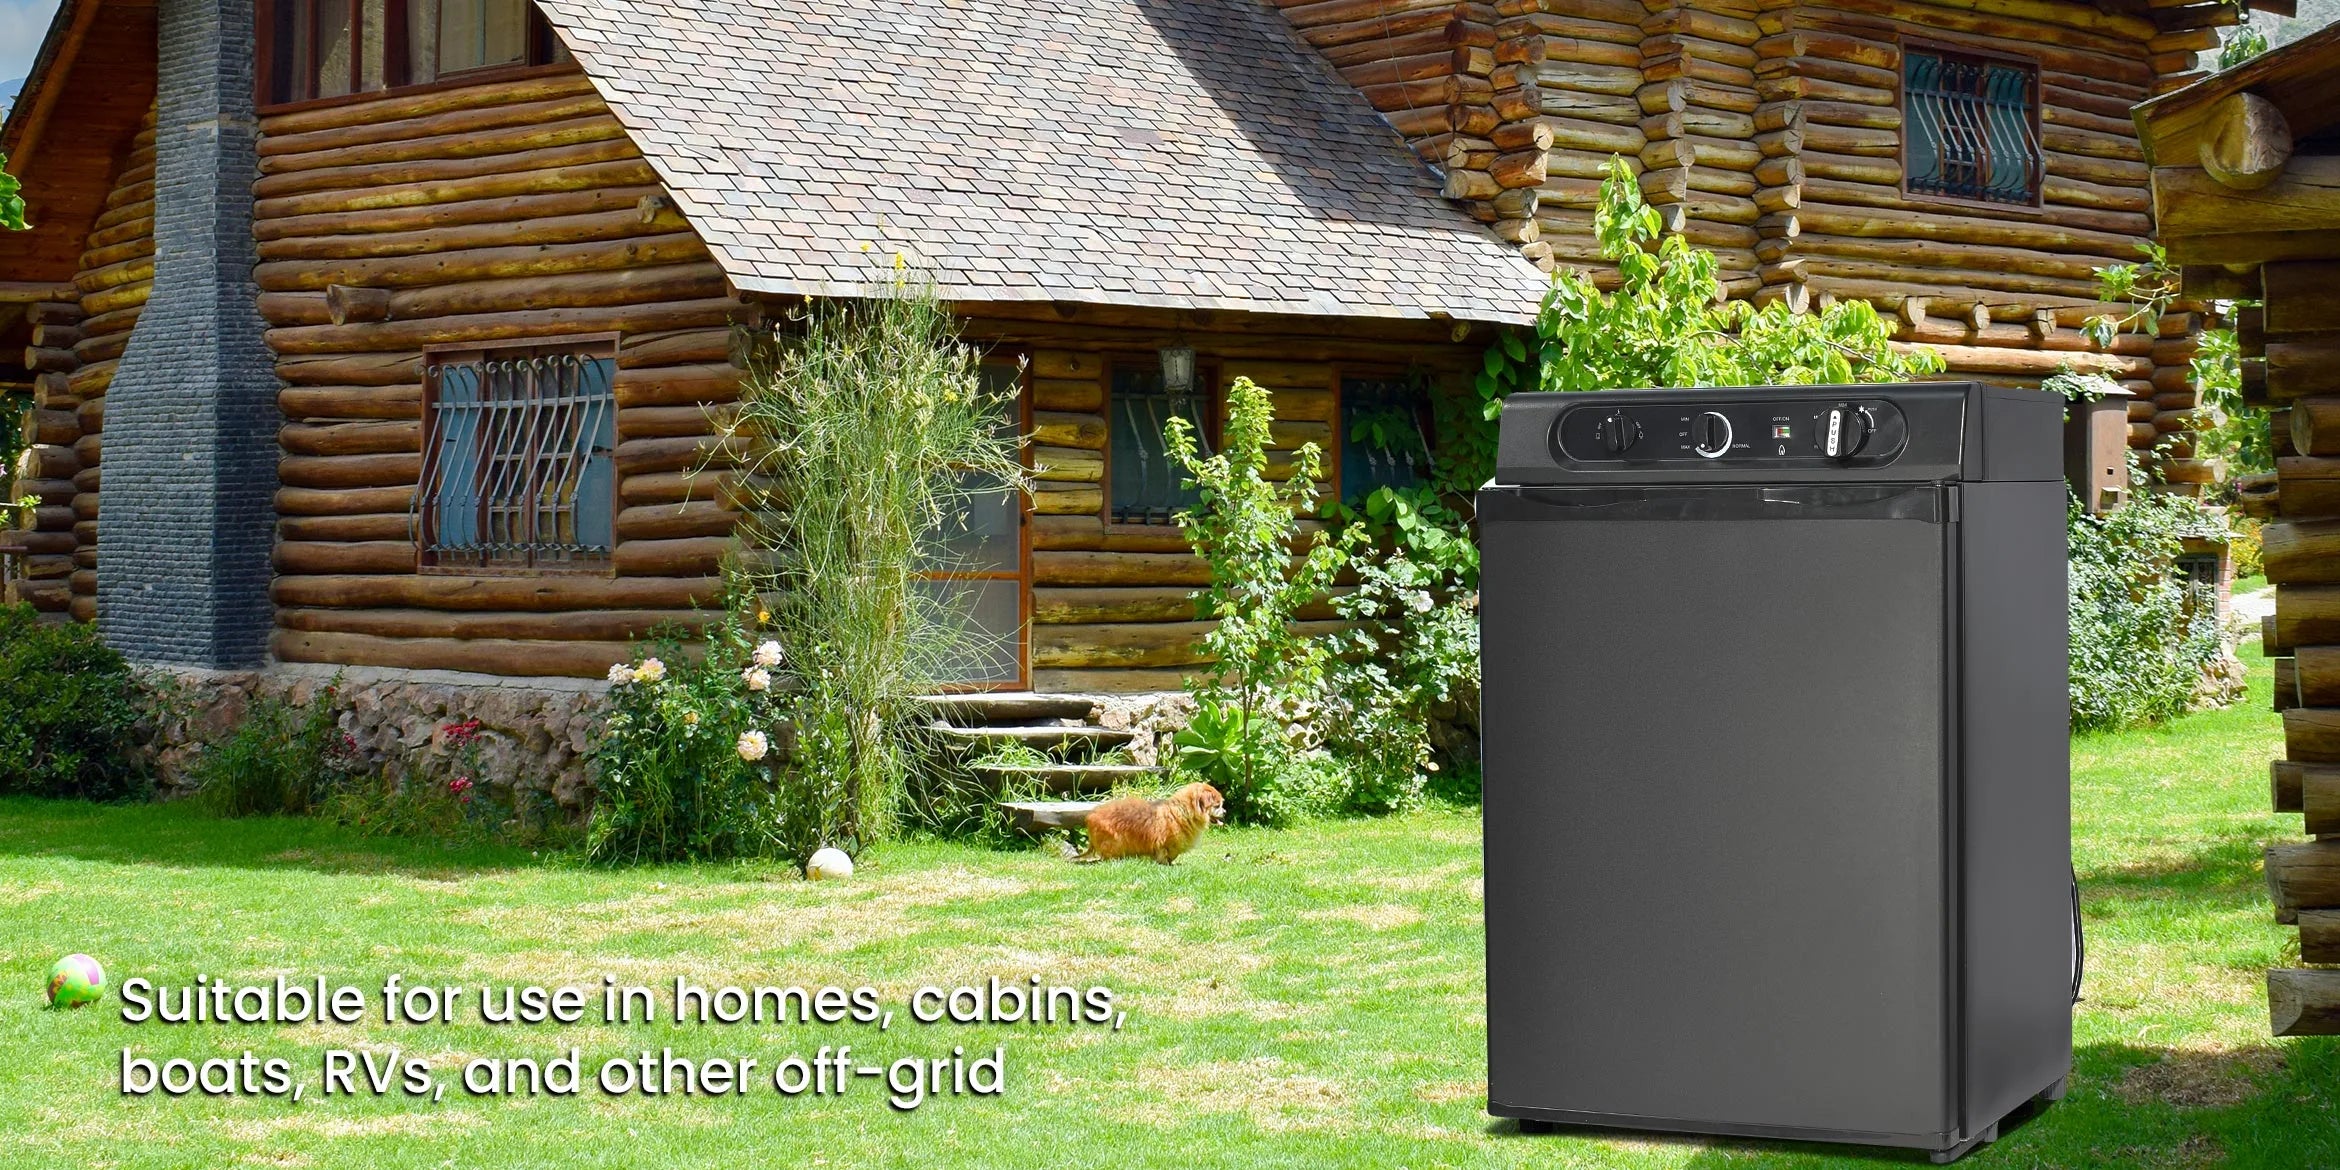 DSG-60L Suitable for use in homes, cabins, boats, RVs, and other off-grid situations